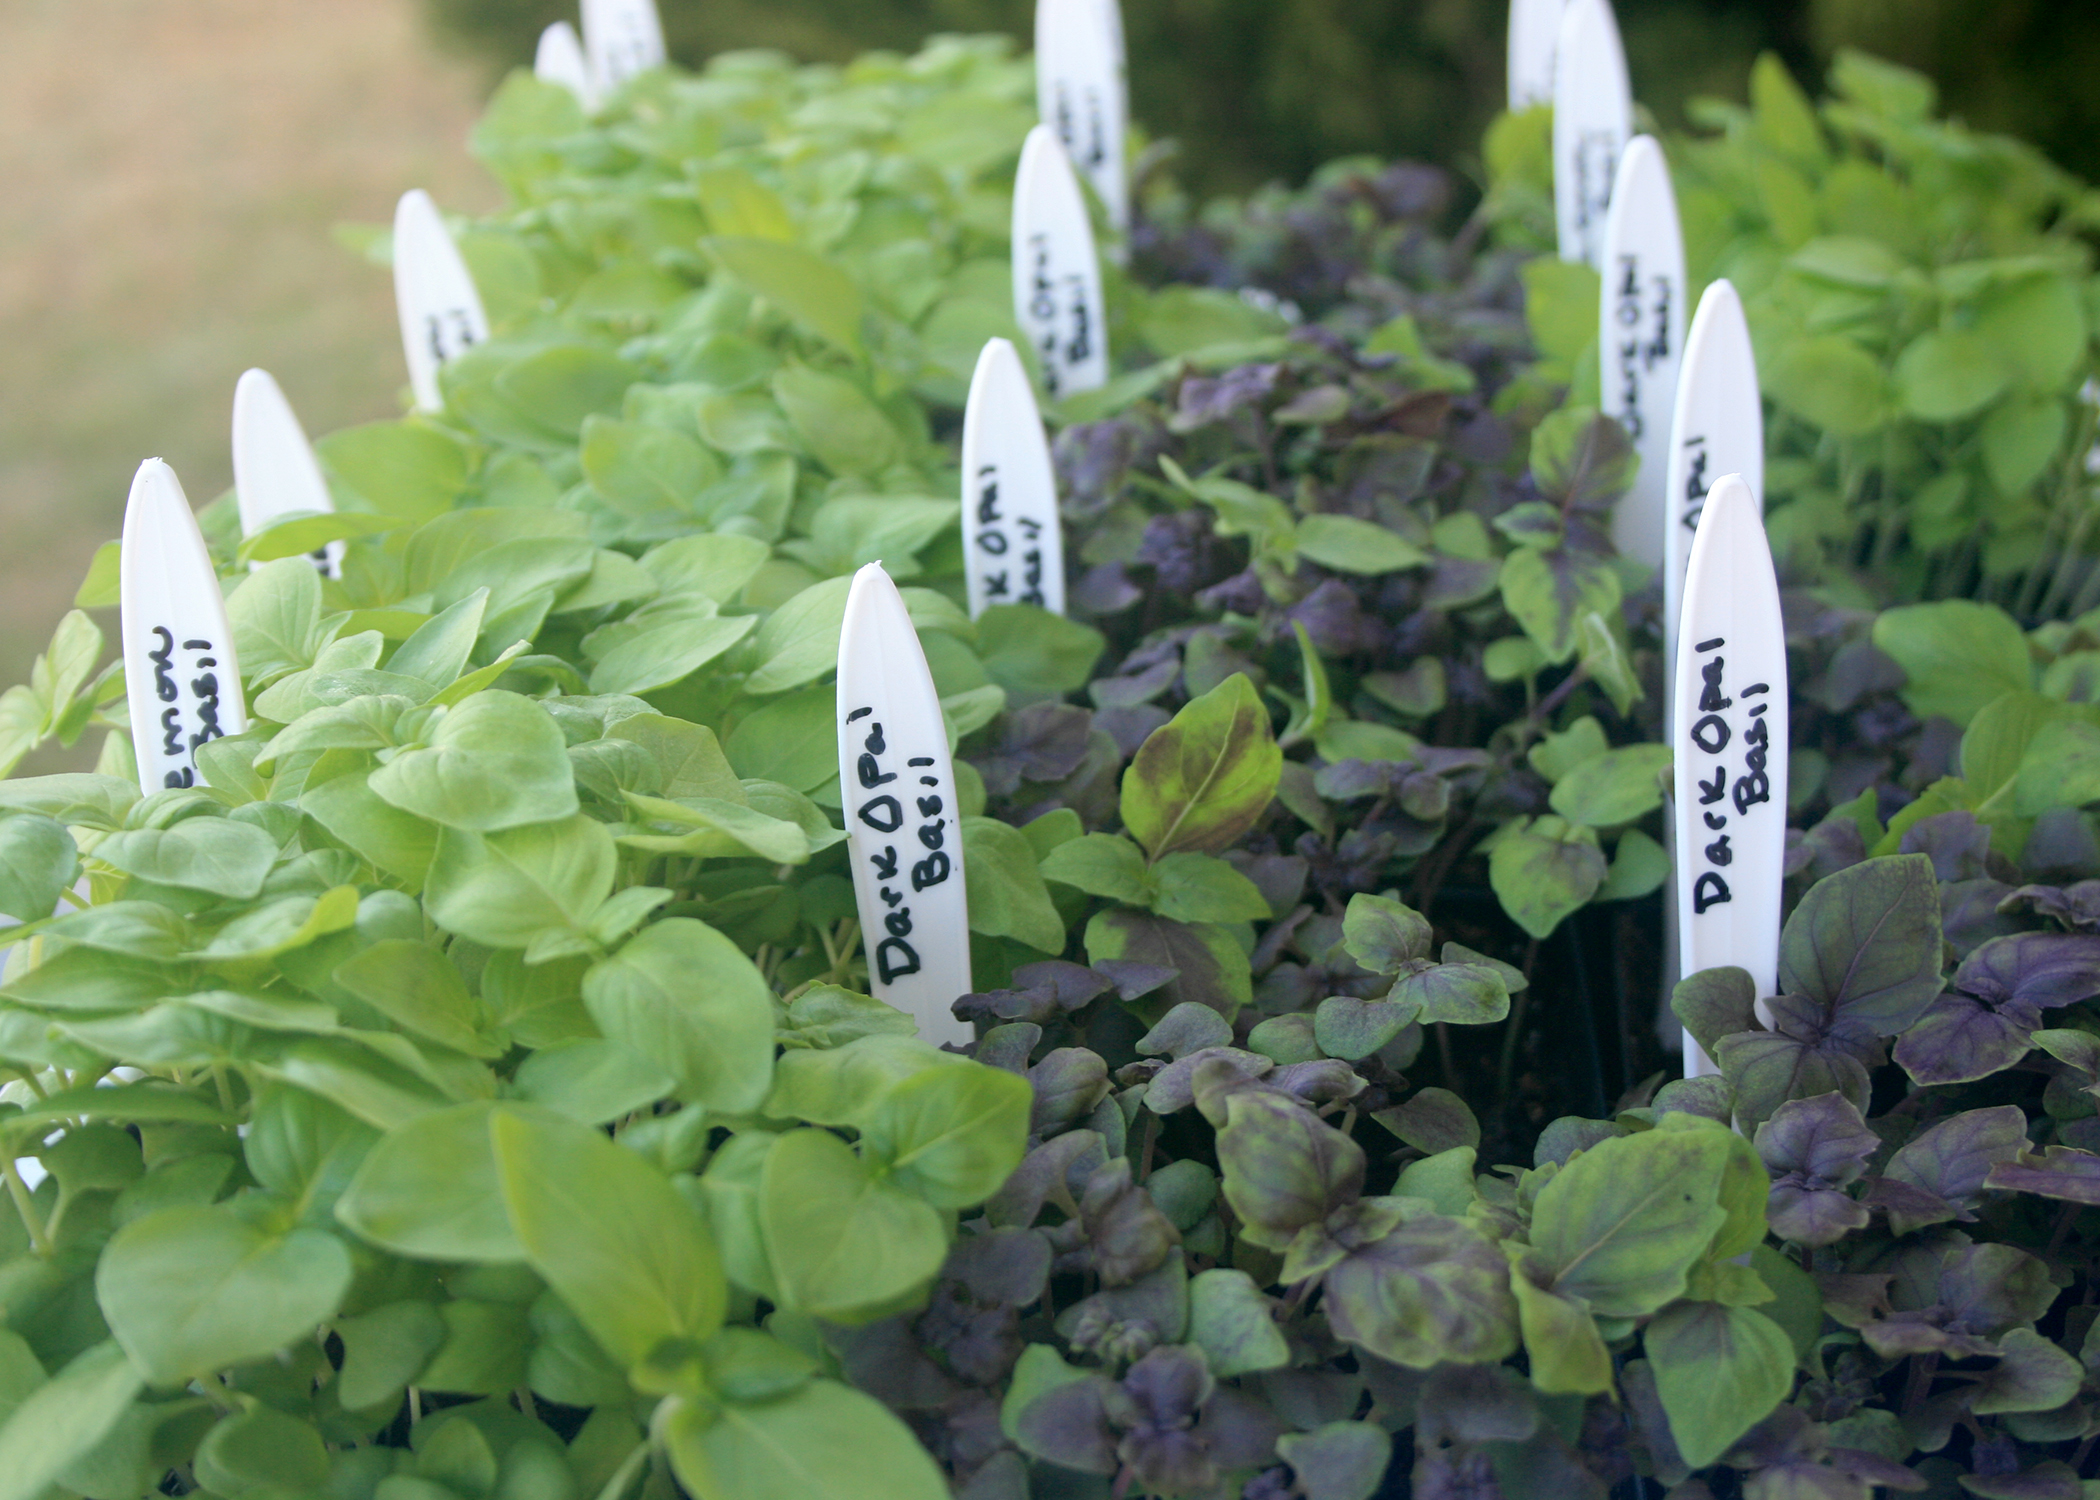 Basil is delicious for summer meals and easy to grow. Its variety of shapes and sizes makes the plant an excellent addition to the perennial garden, shrub border or container garden. (Photo by Gary Bachman/MSU Extension Service)